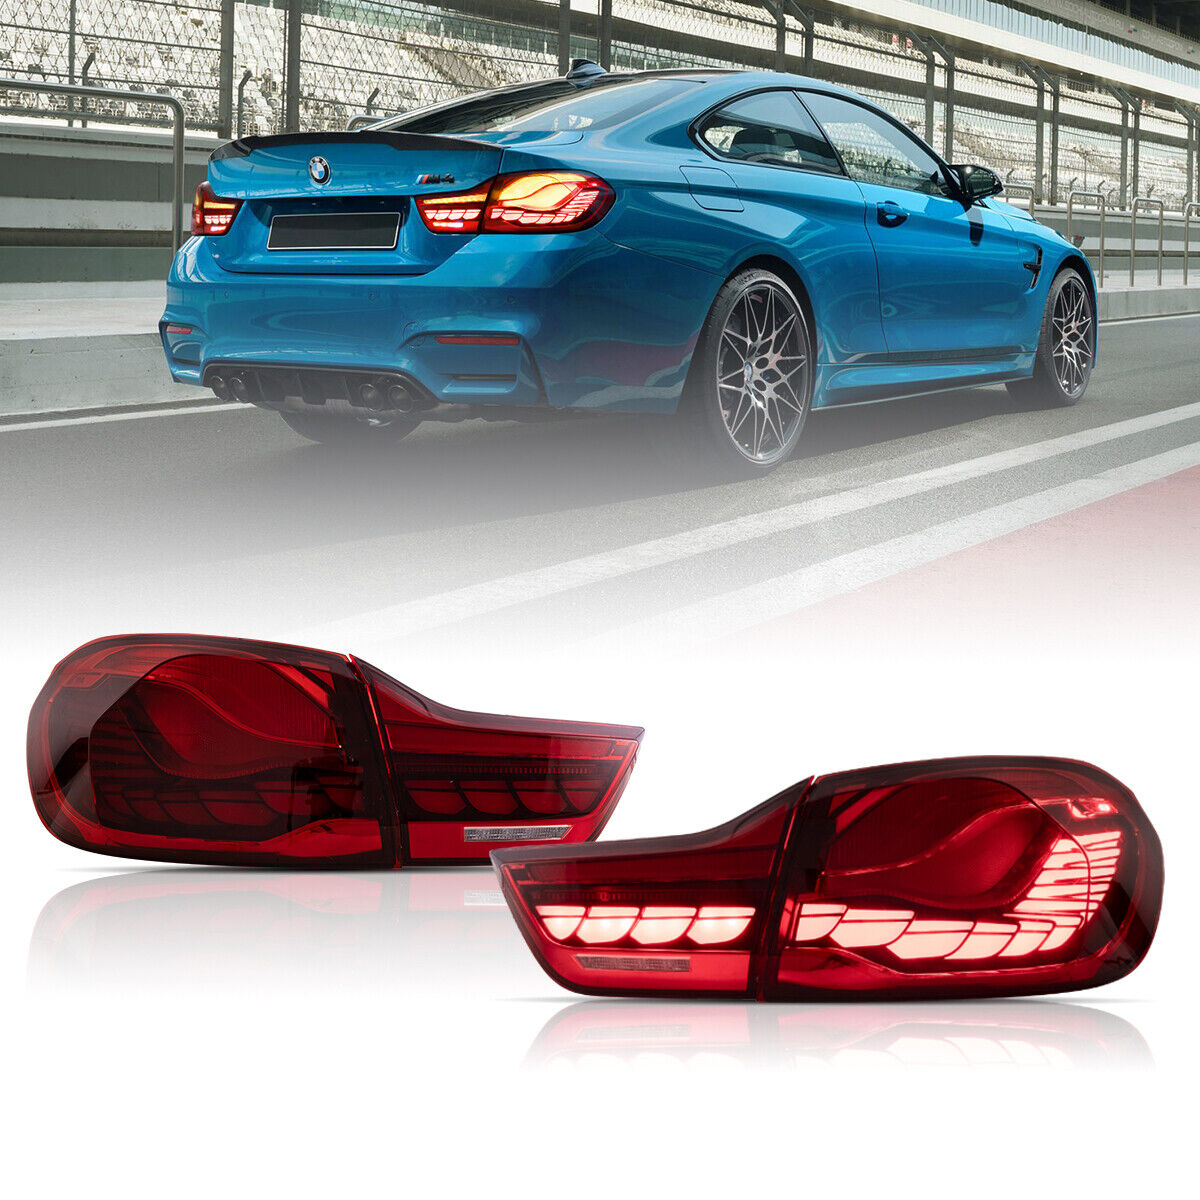 VLAND GTS OLED Tail Lights For BMW M4 4-Series F32 F82 2014-20 w/Sequential Turn